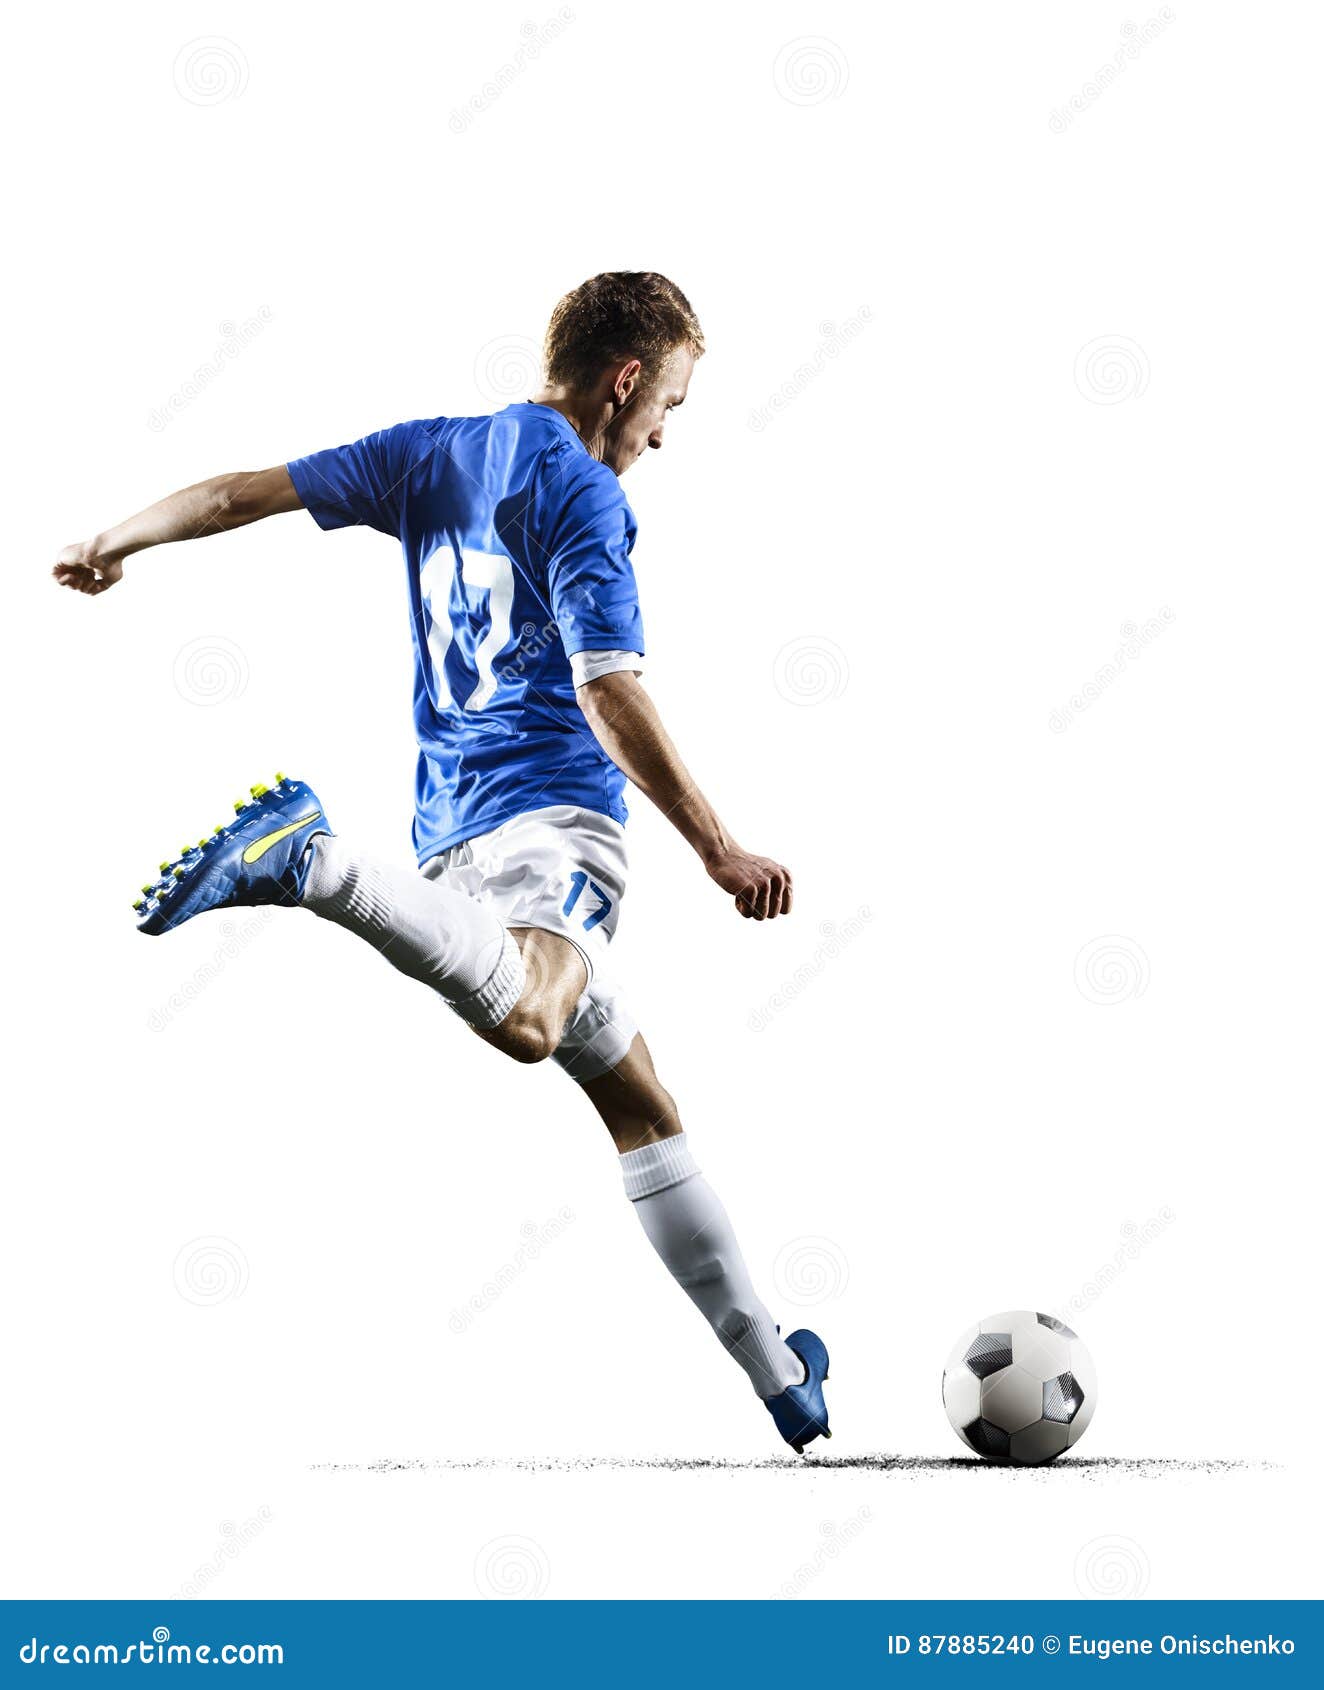 famous soccer player in action